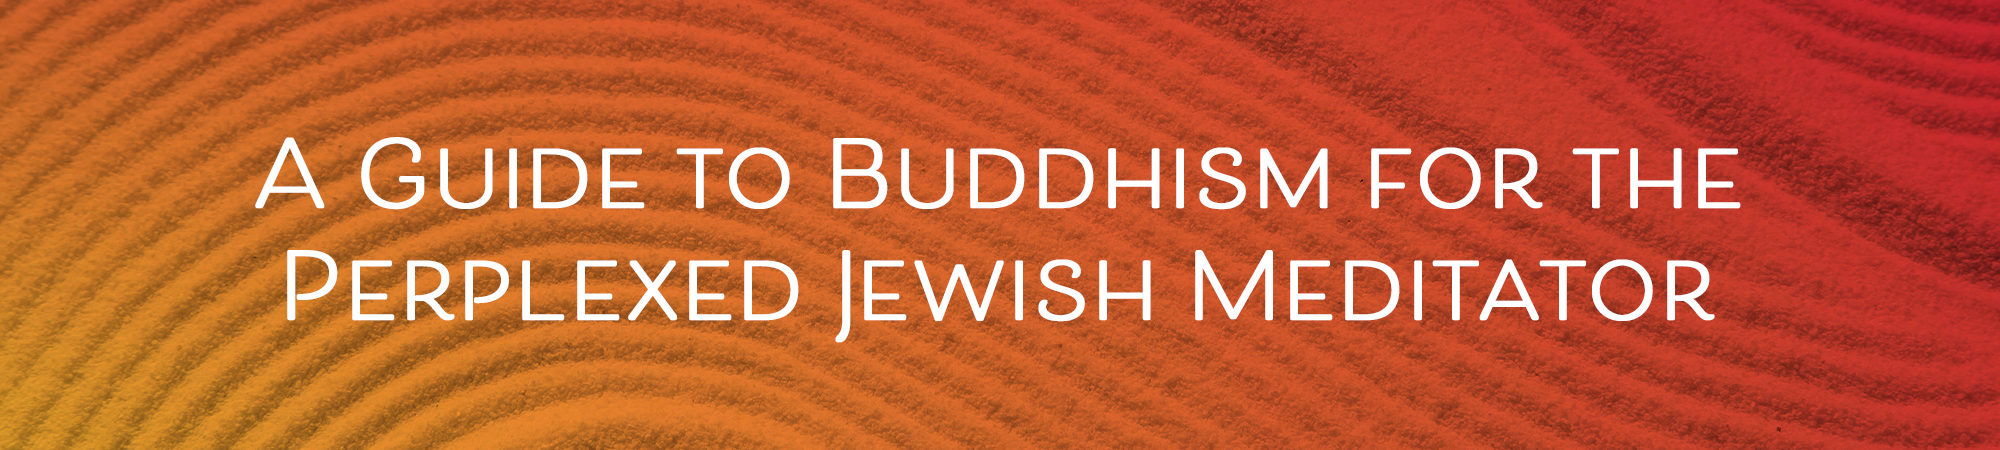 The Institute for Jewish Spirituality presents Awareness in Action